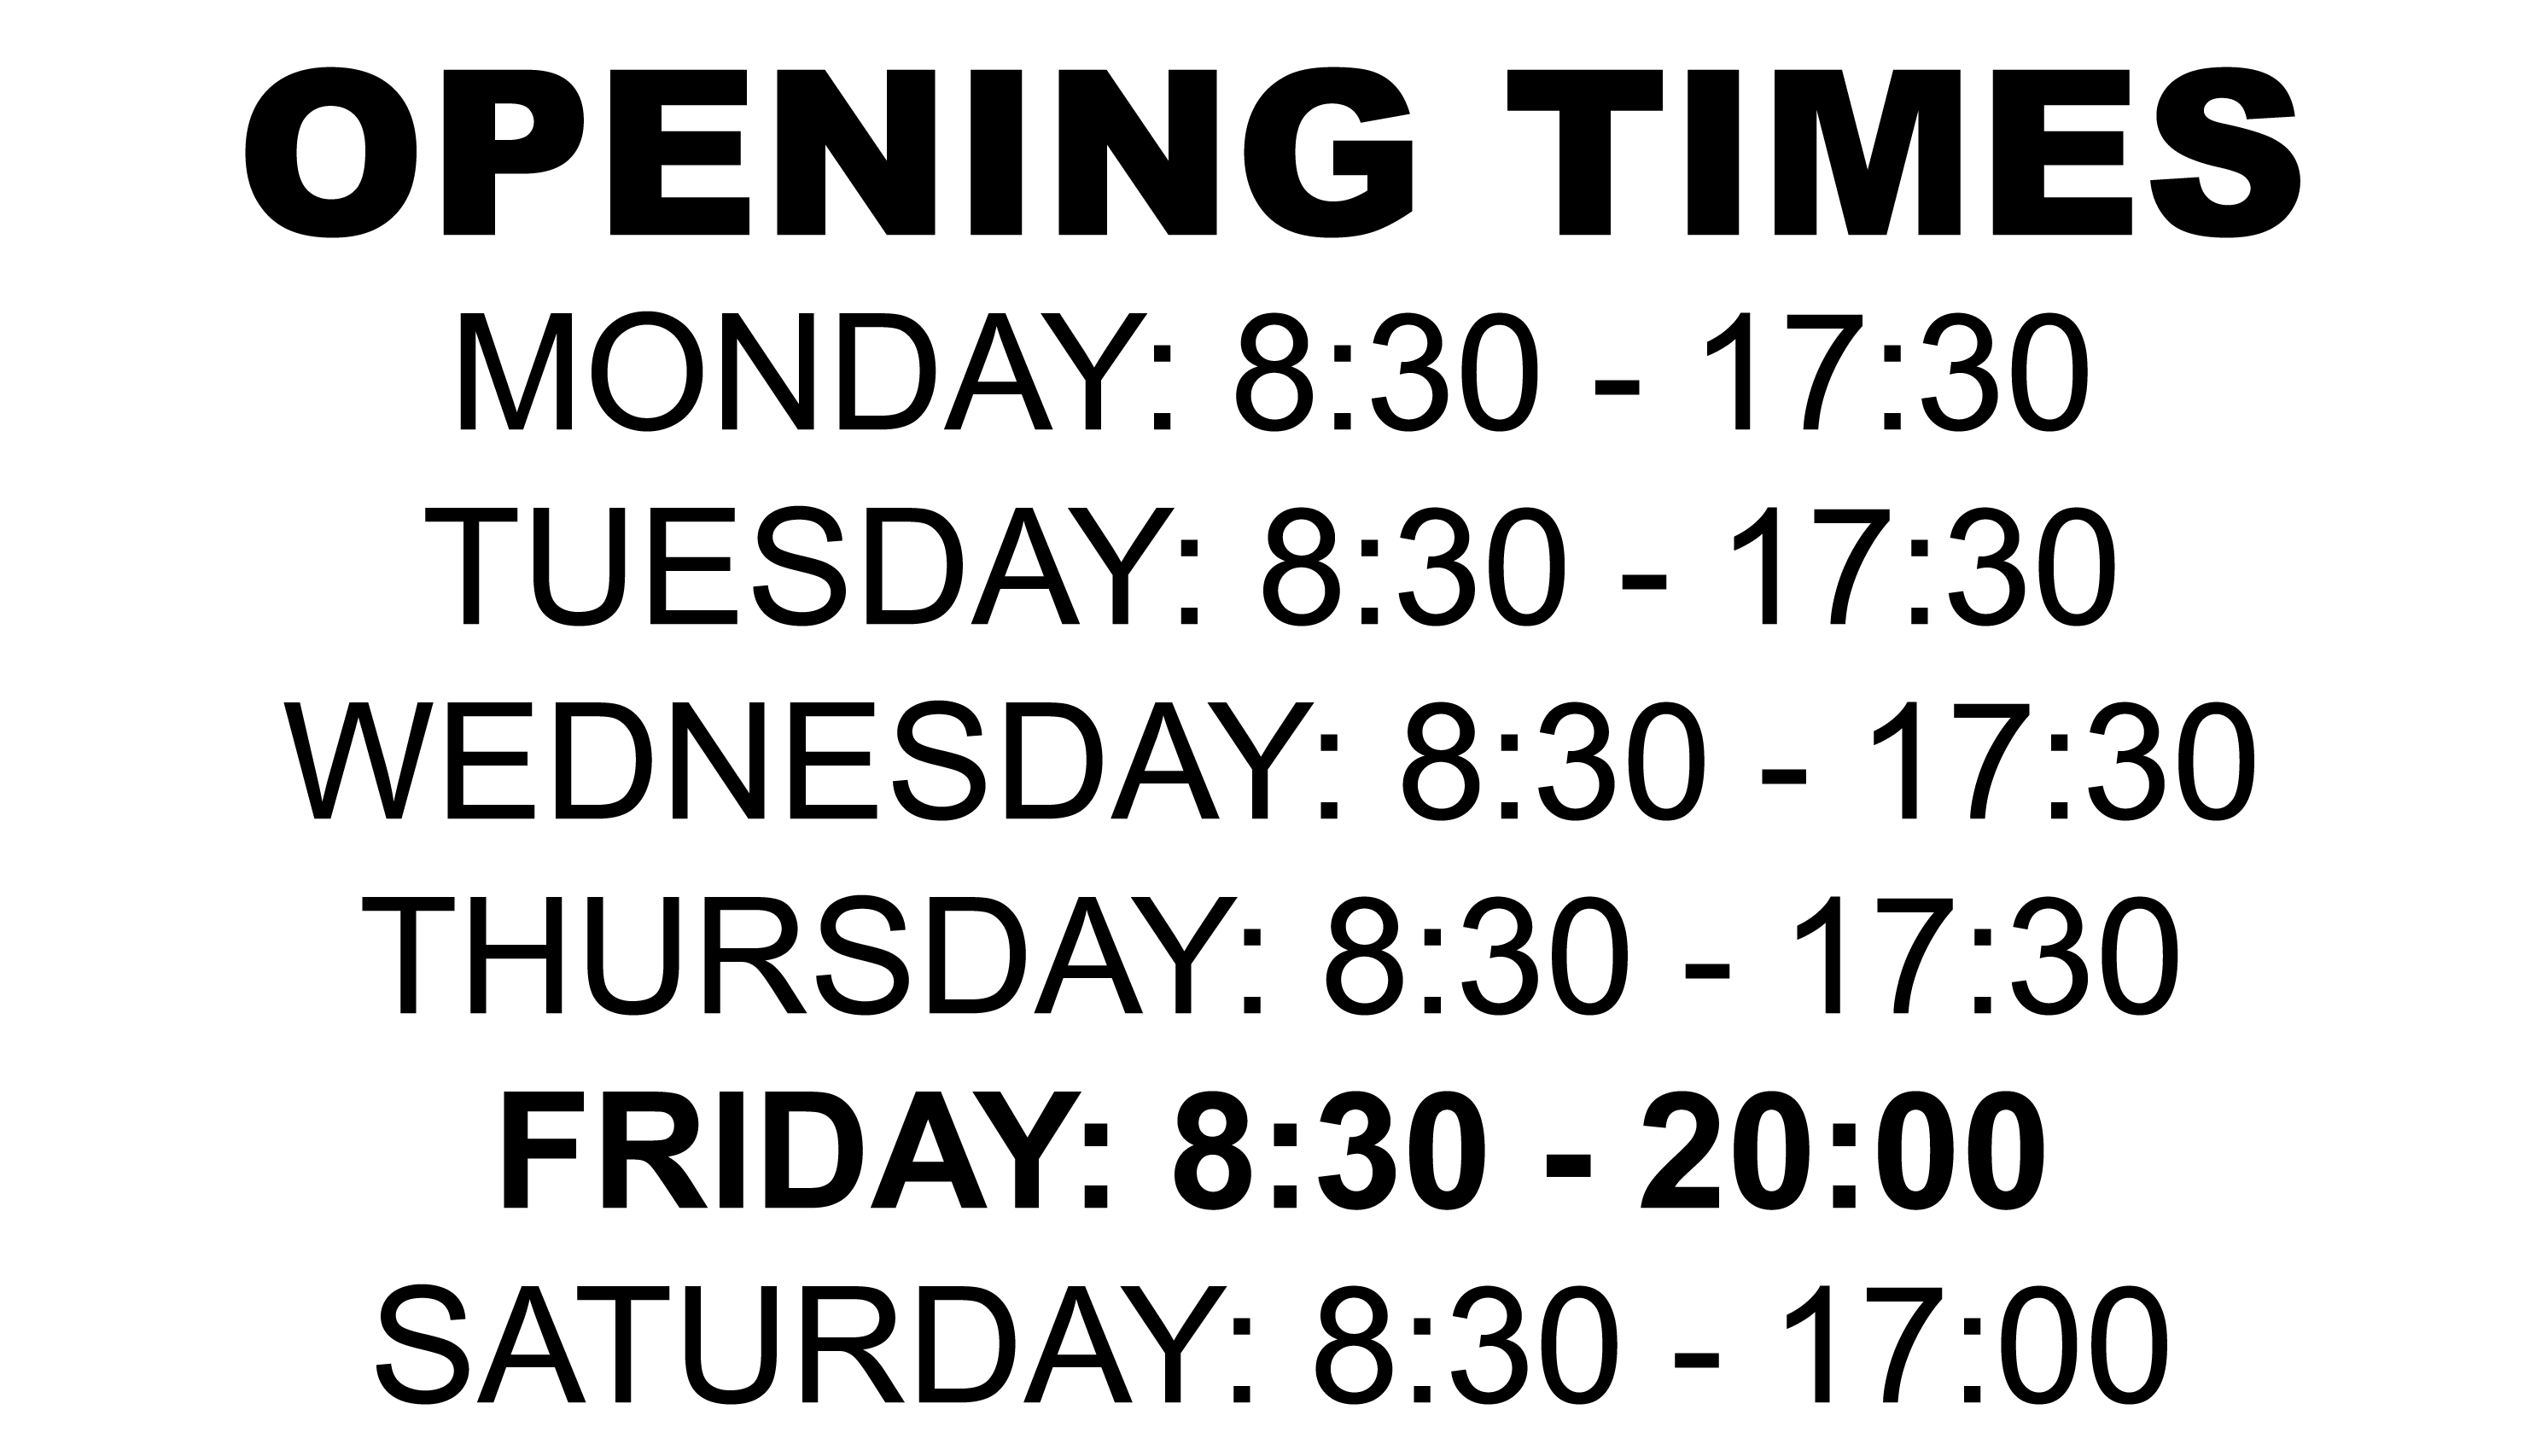 OPENING TIMES